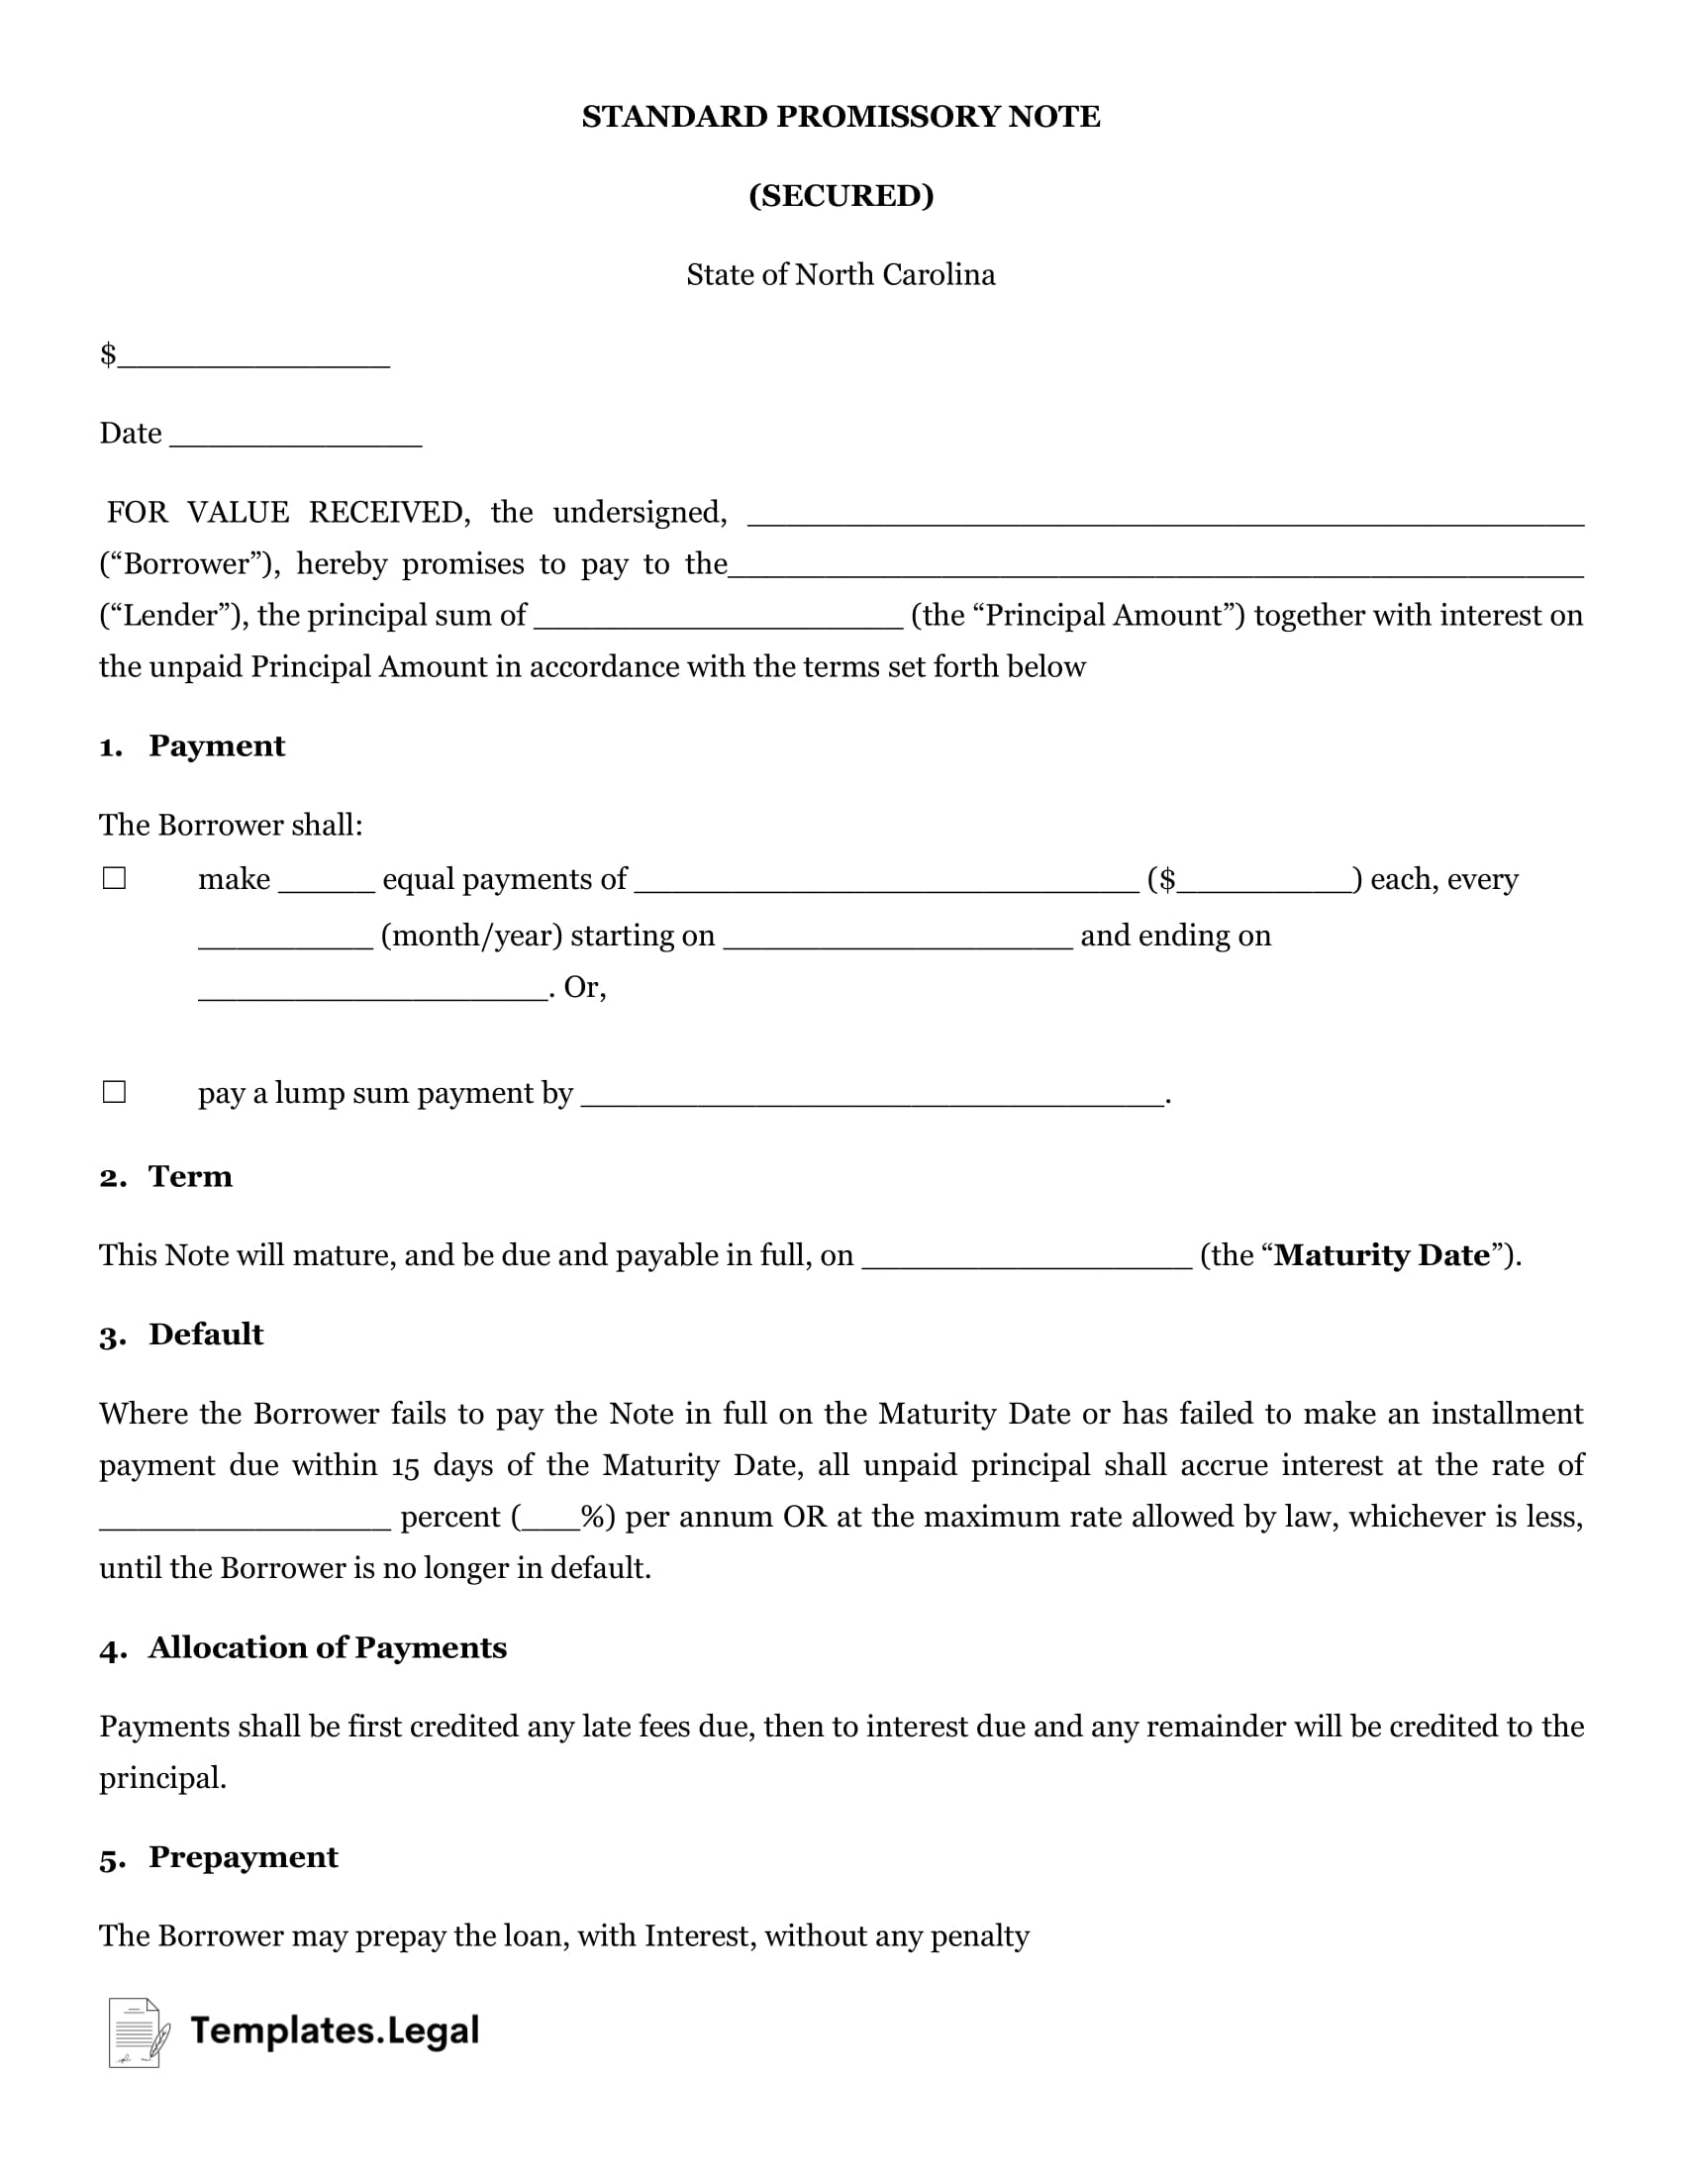 North Carolina Promissory Note Templates (Free) [Word, Pdf, Odt] Pertaining To Secured Promissory Note Template